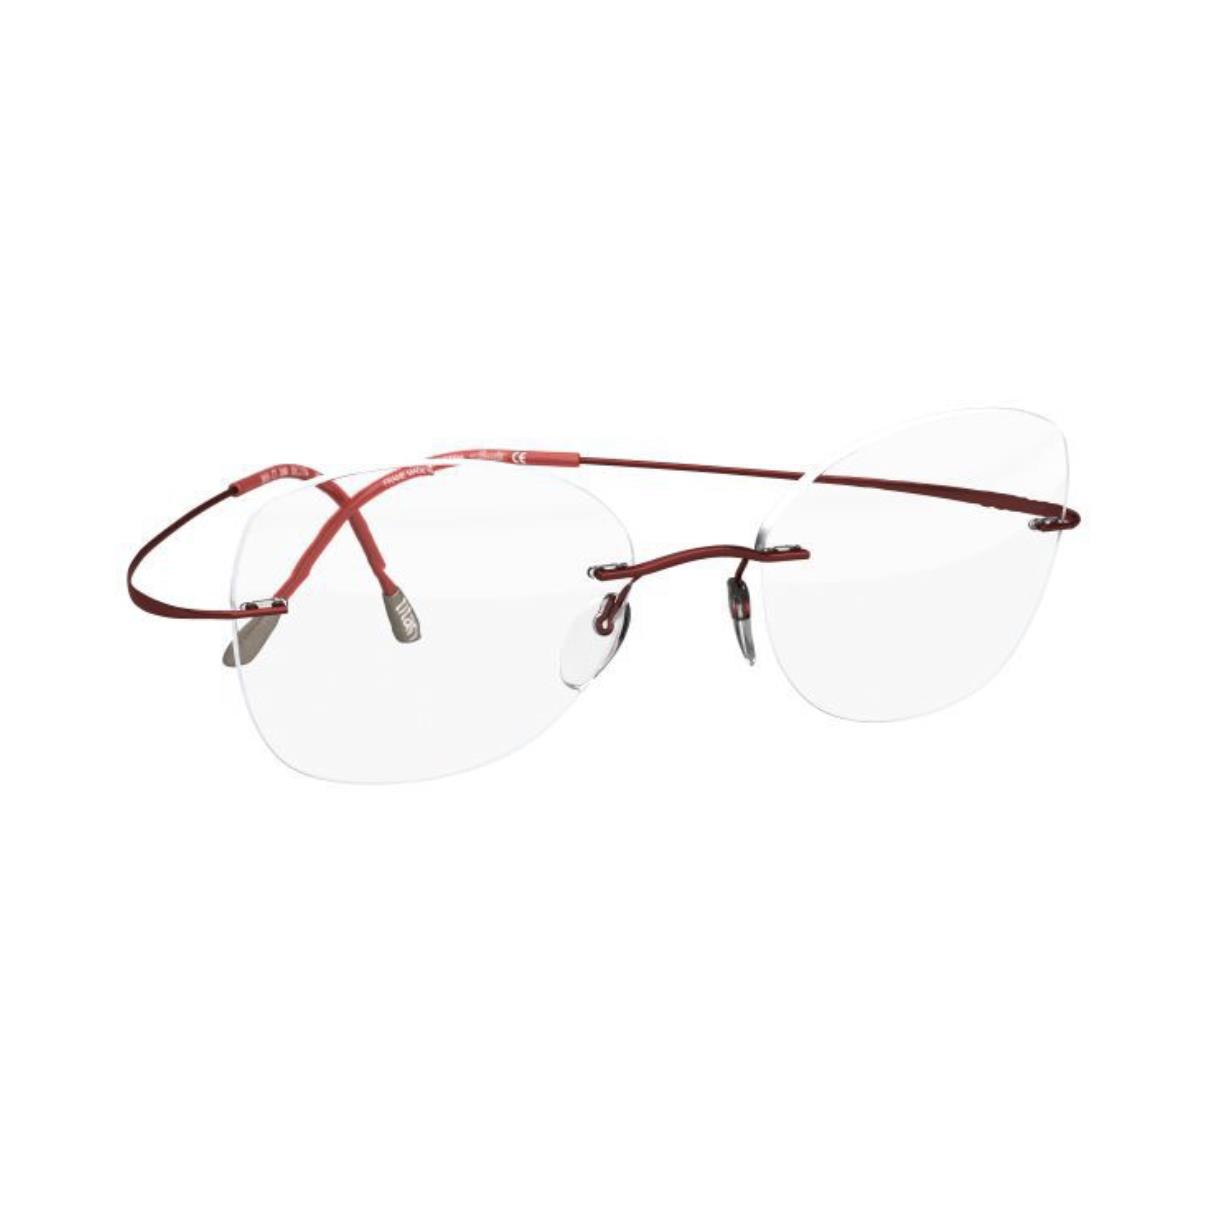 Silhouette Rimless Eyeglasses Titan Minimal Art The Must Collection Frames WINE - 3040, SIZE: 53-17 140, SHAPE - CT